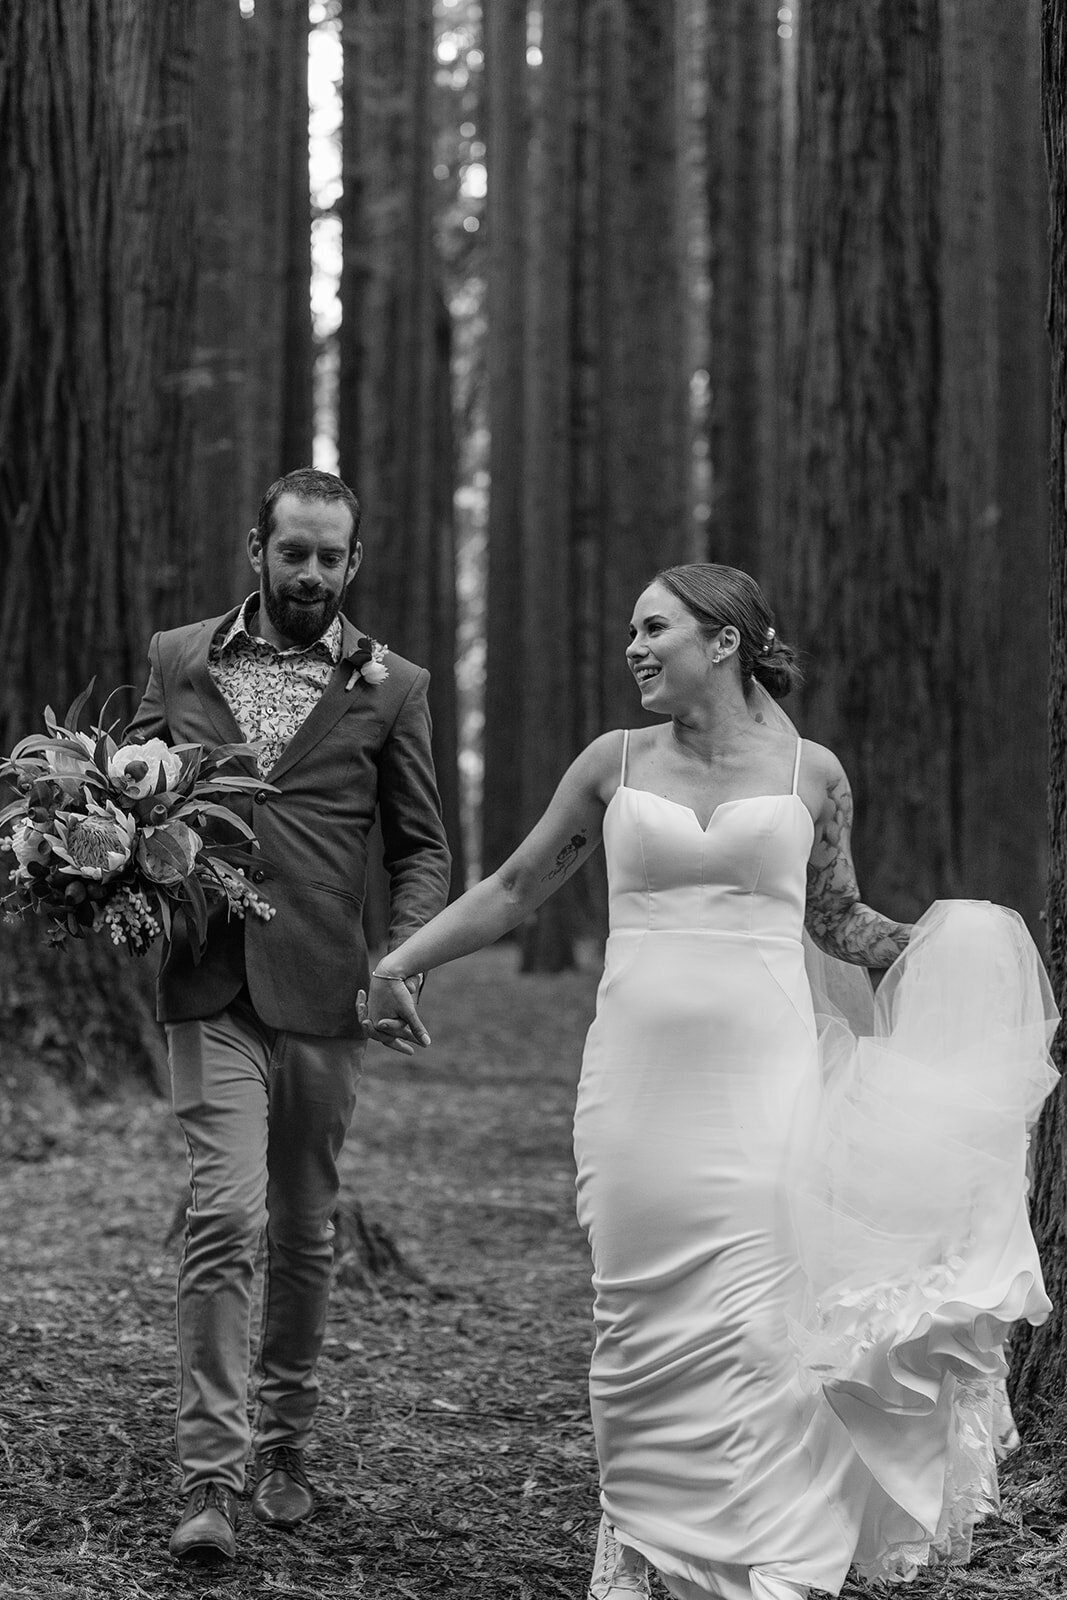 Stacey&Cory-Coast&Pines-378